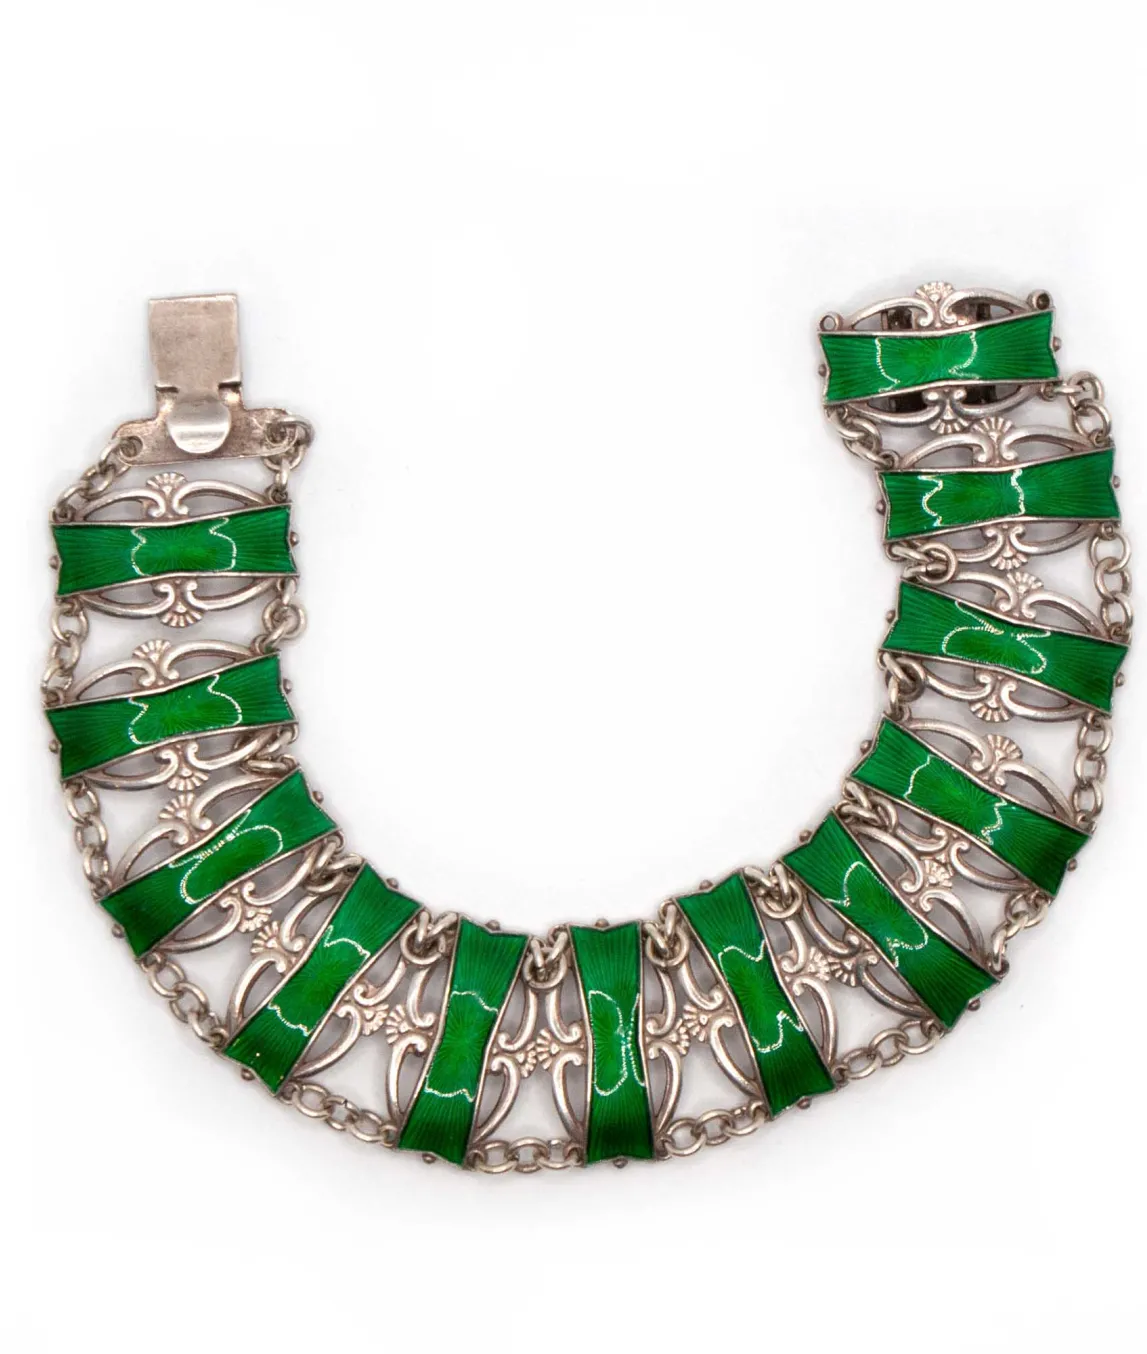 Silver and green enamel bracelet by Ivar Holth laying in a u shape